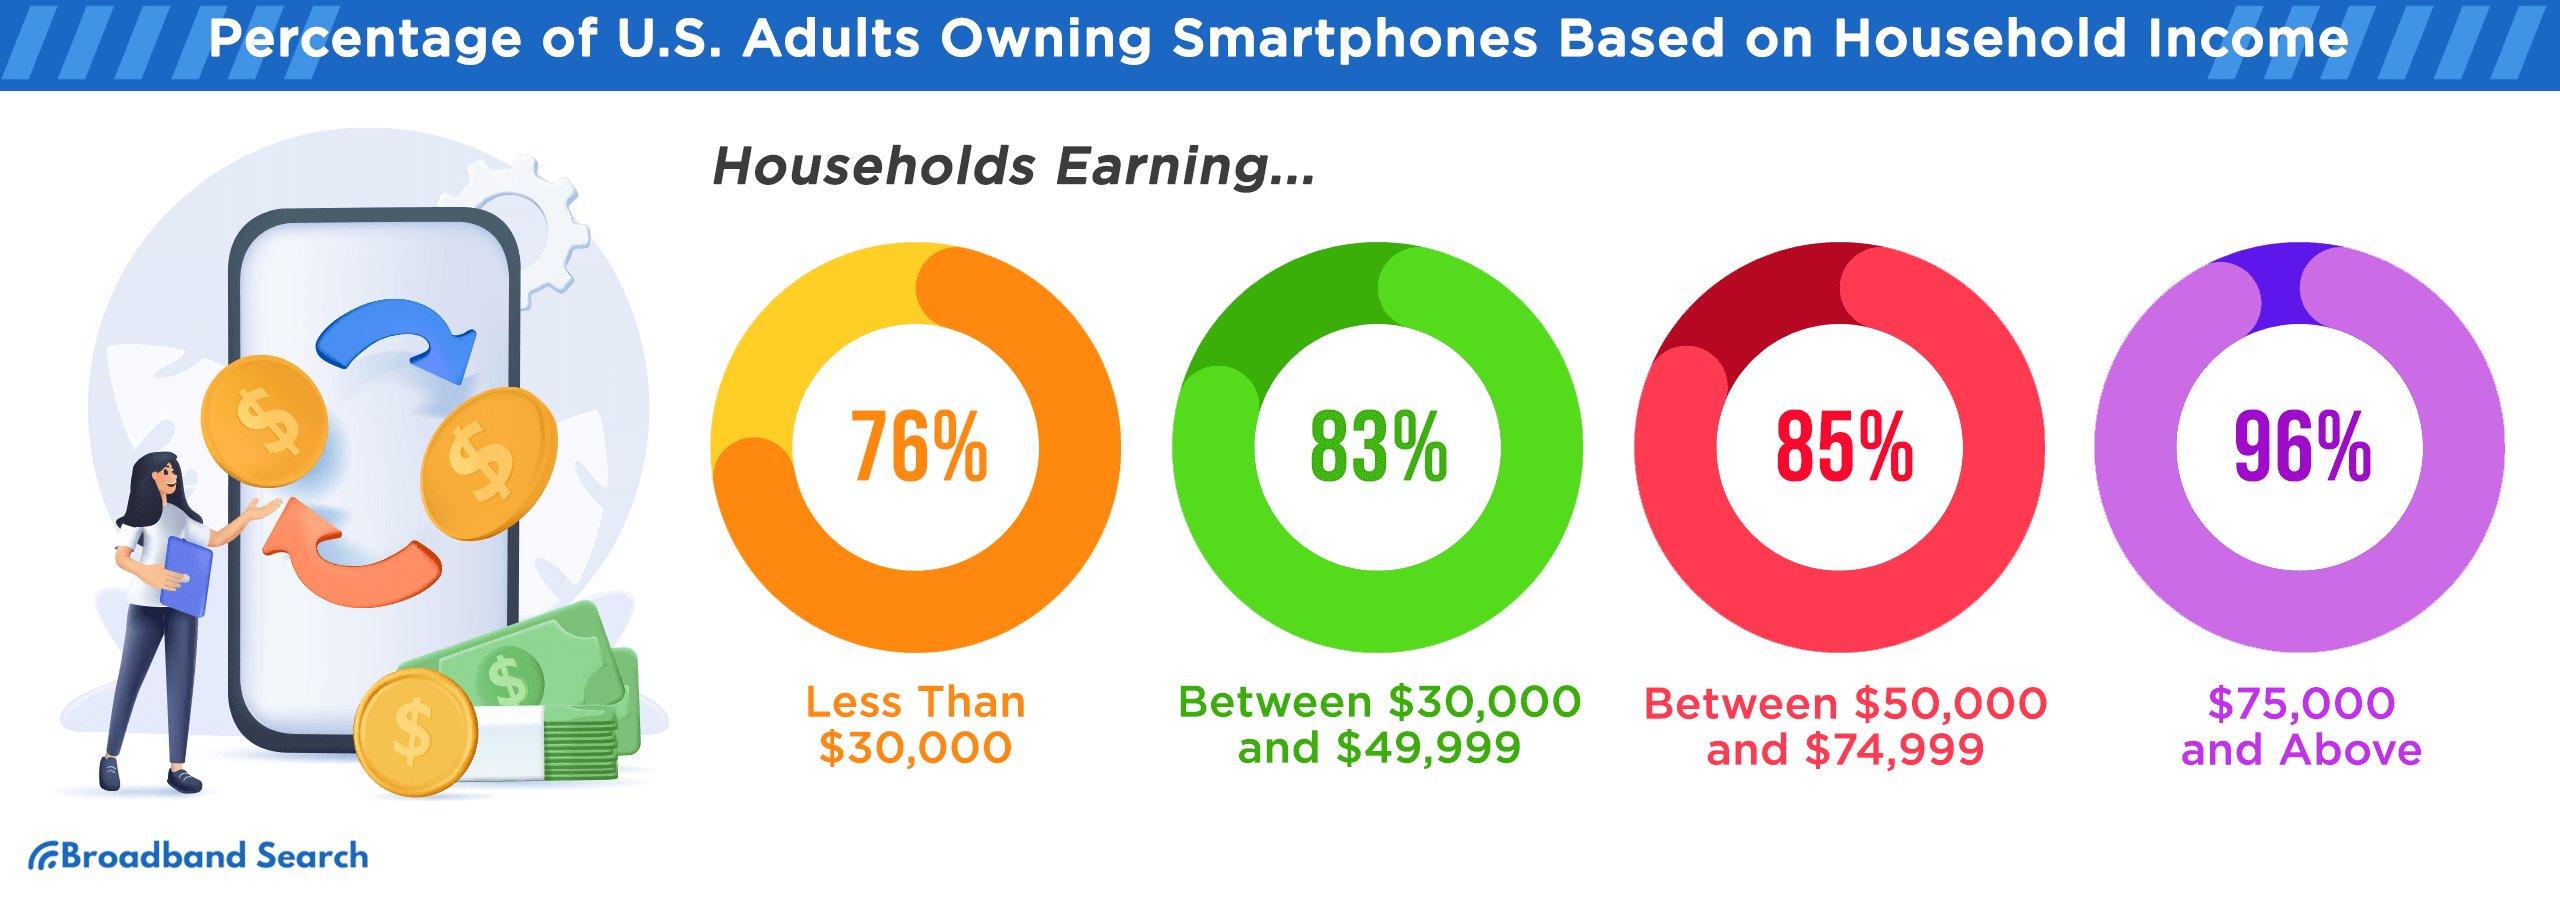 Percentage of U.S. adults owning smartphones based on household income